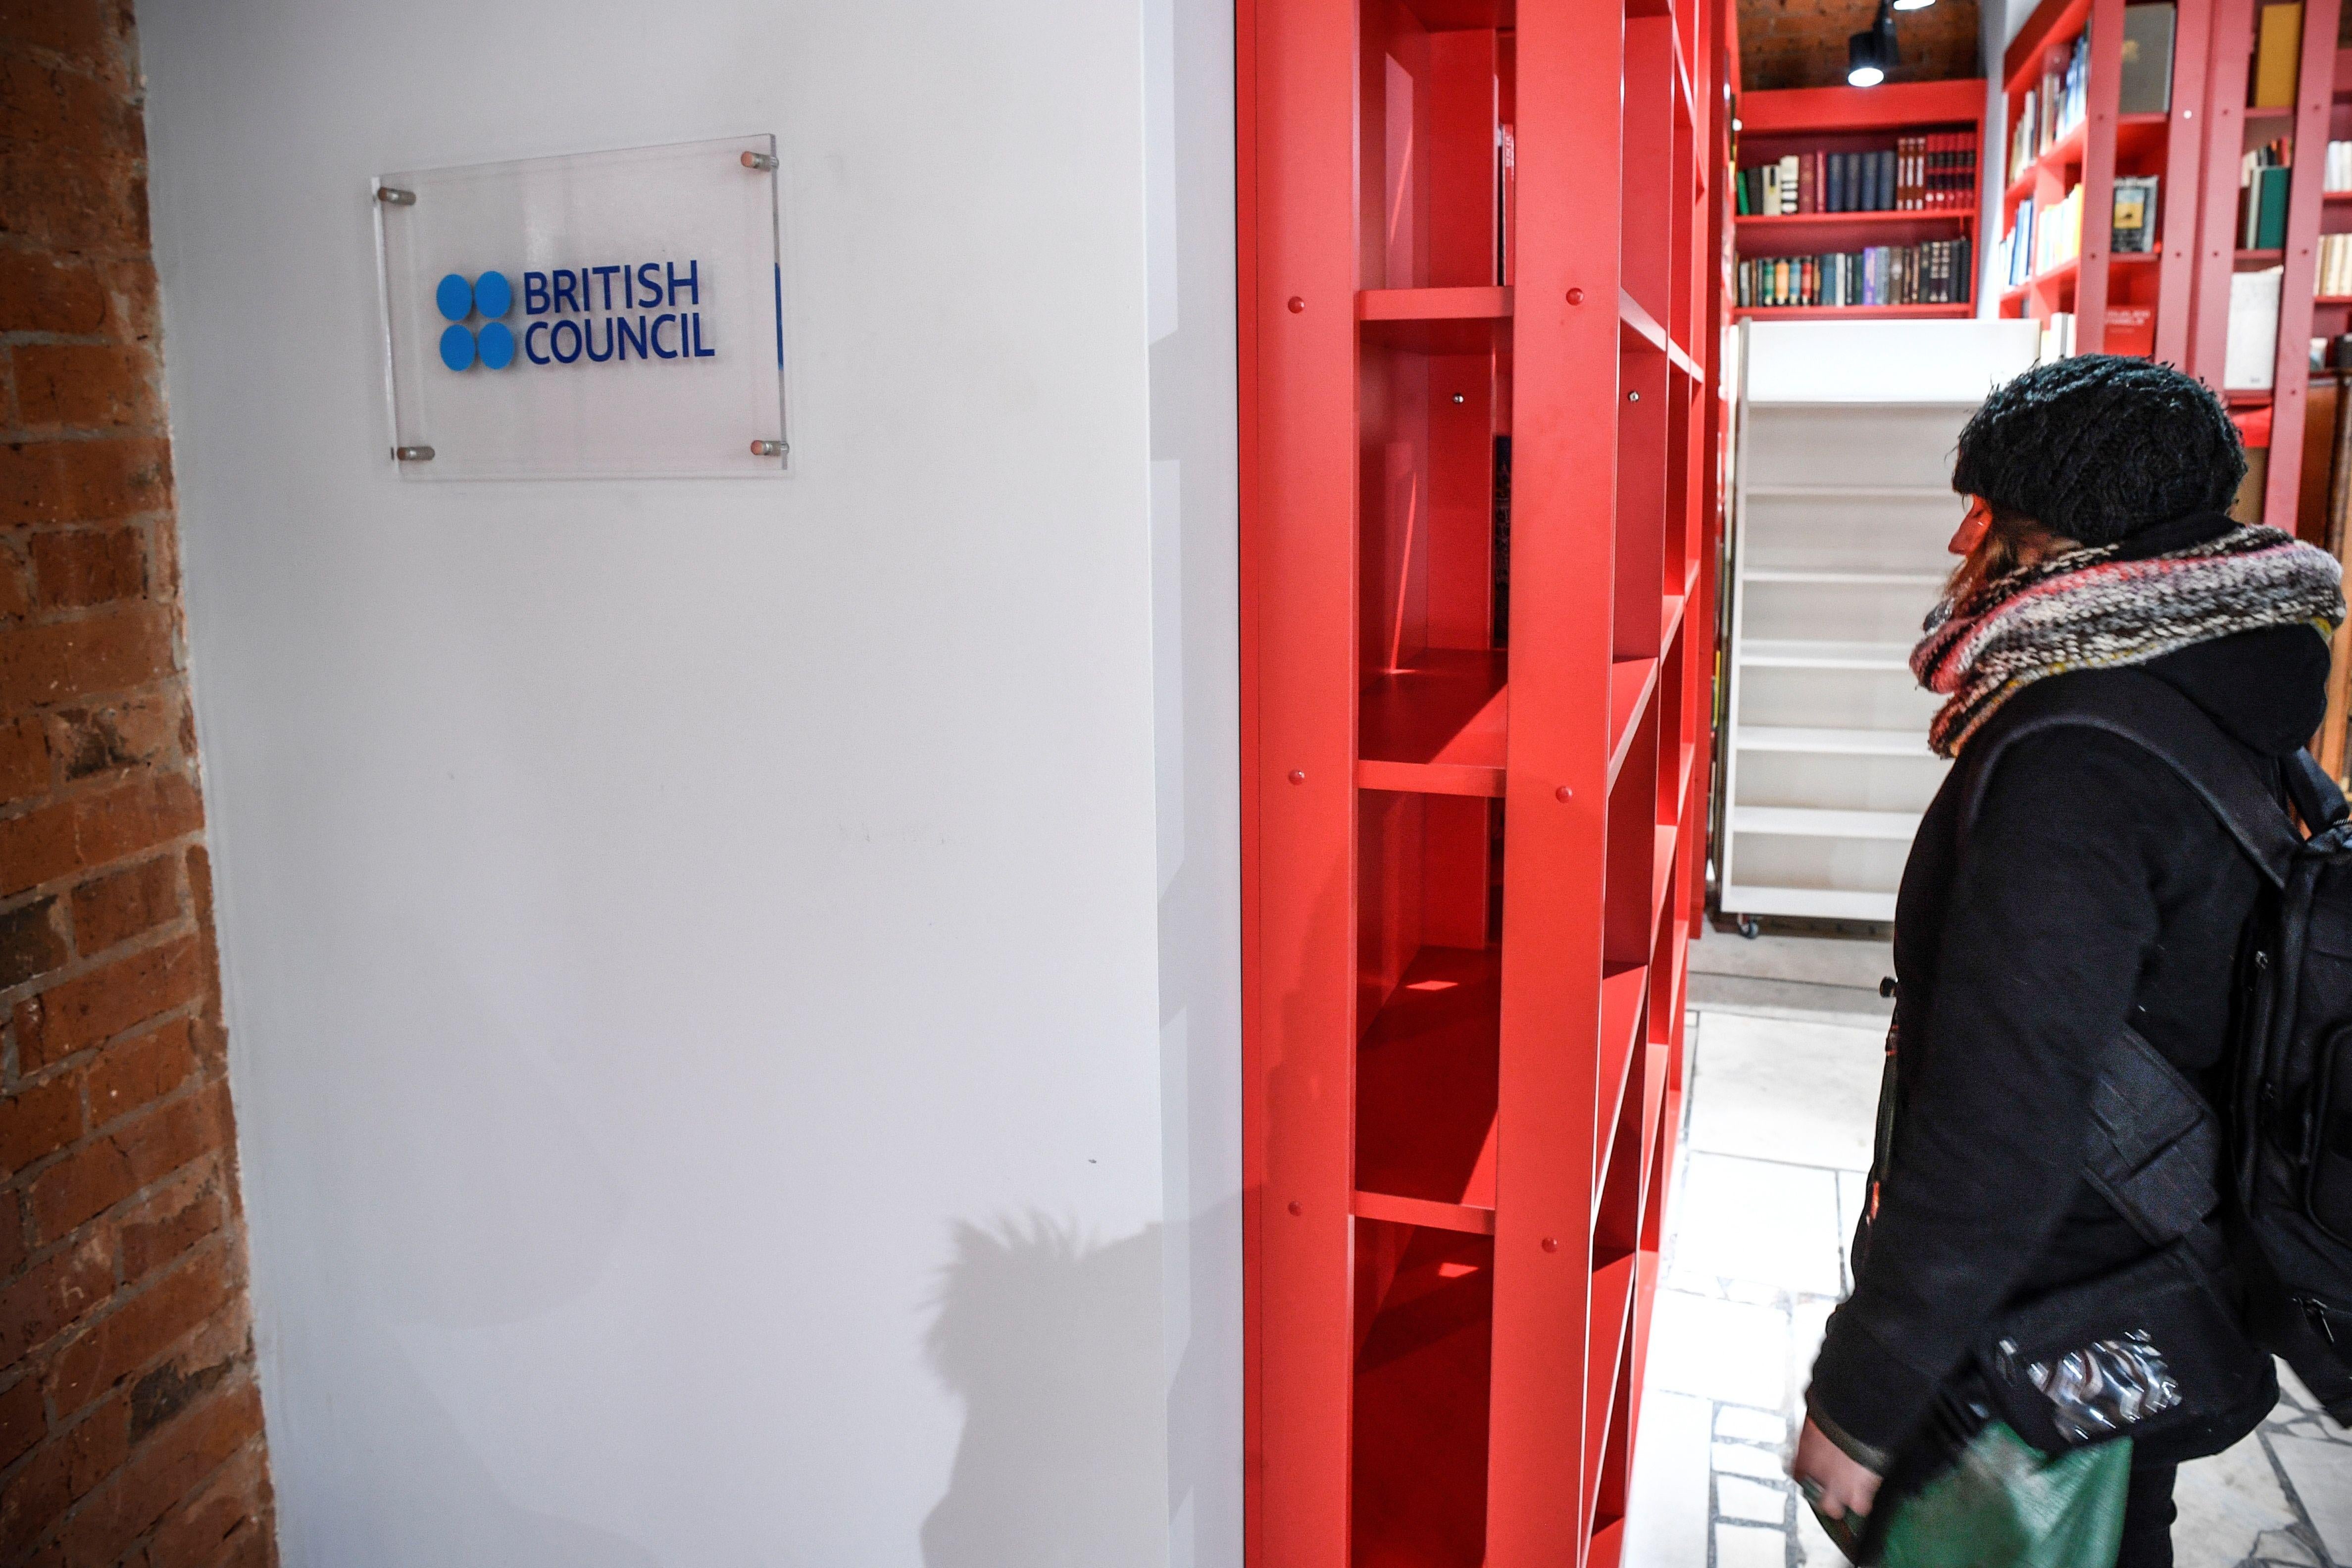 A woman stands next to the entrance of the British Council office in Moscow on March 2018.